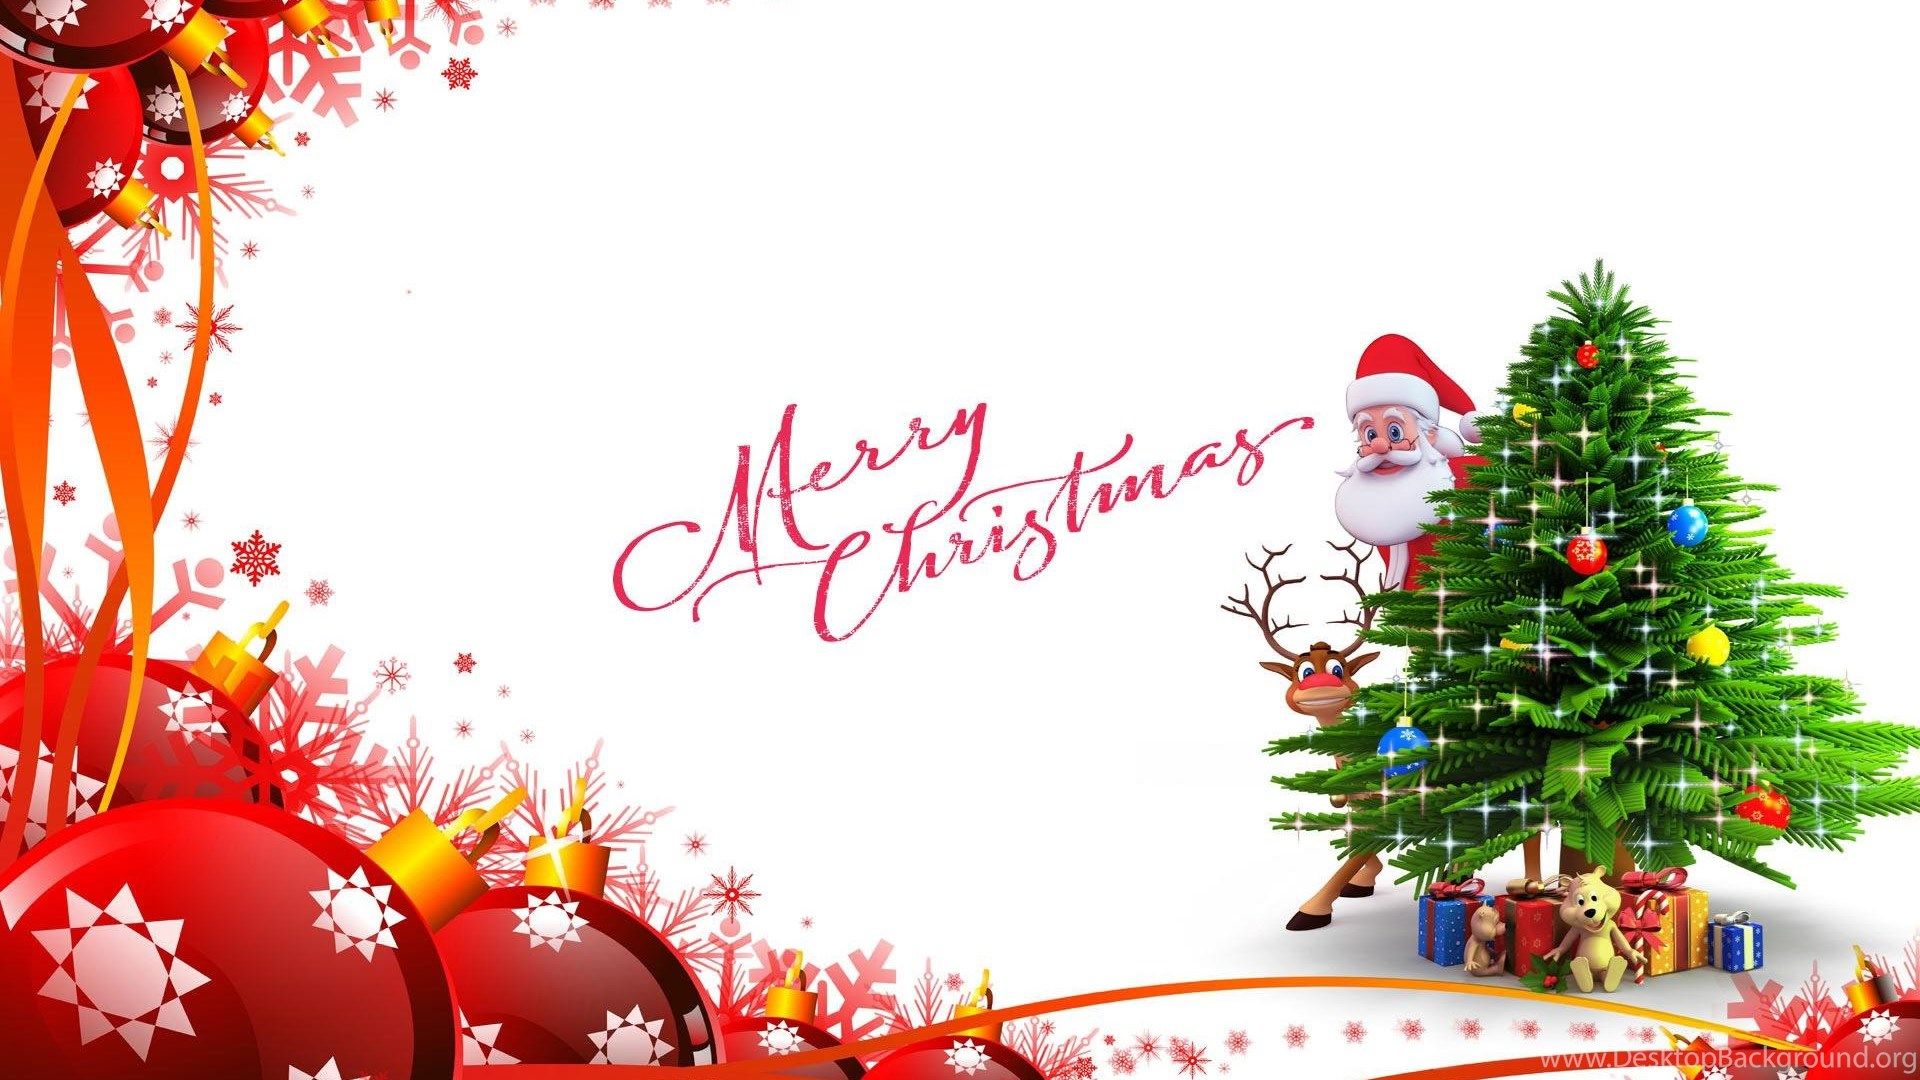 Merry Christmas HD Wallpaper 2015 Welcome Happy New Year 2016 Desktop Background